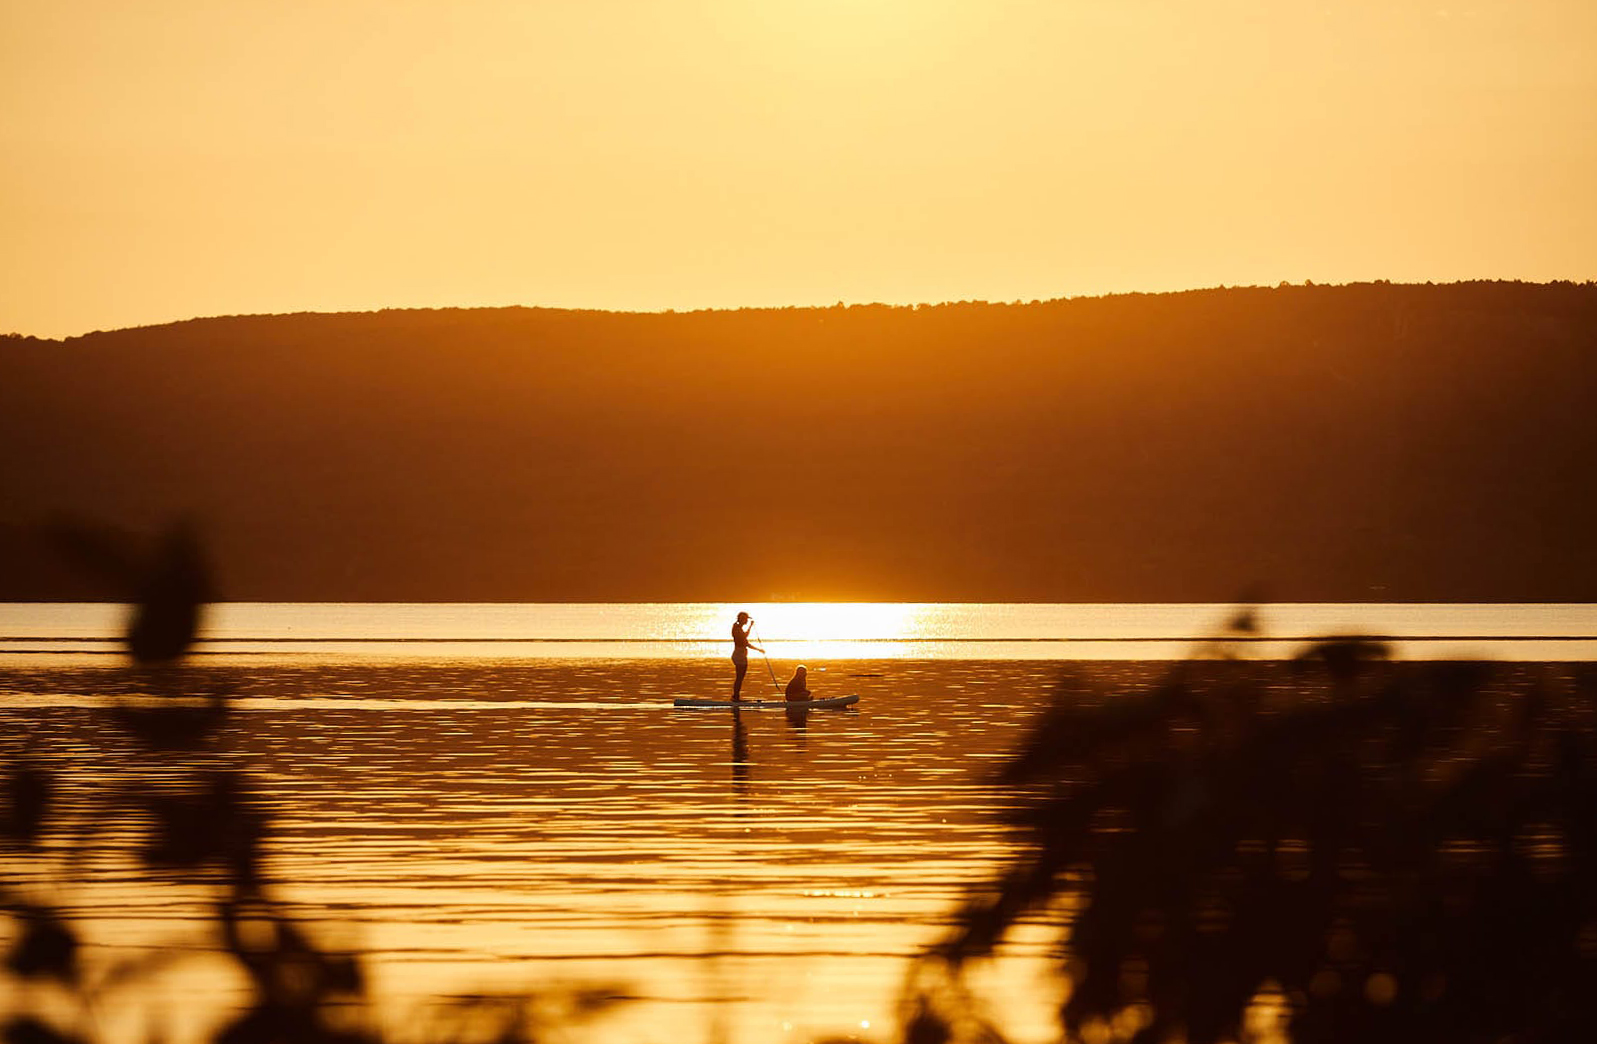 A woman standing on a paddle board with someone sitting on the front. The light is very warm and golden.